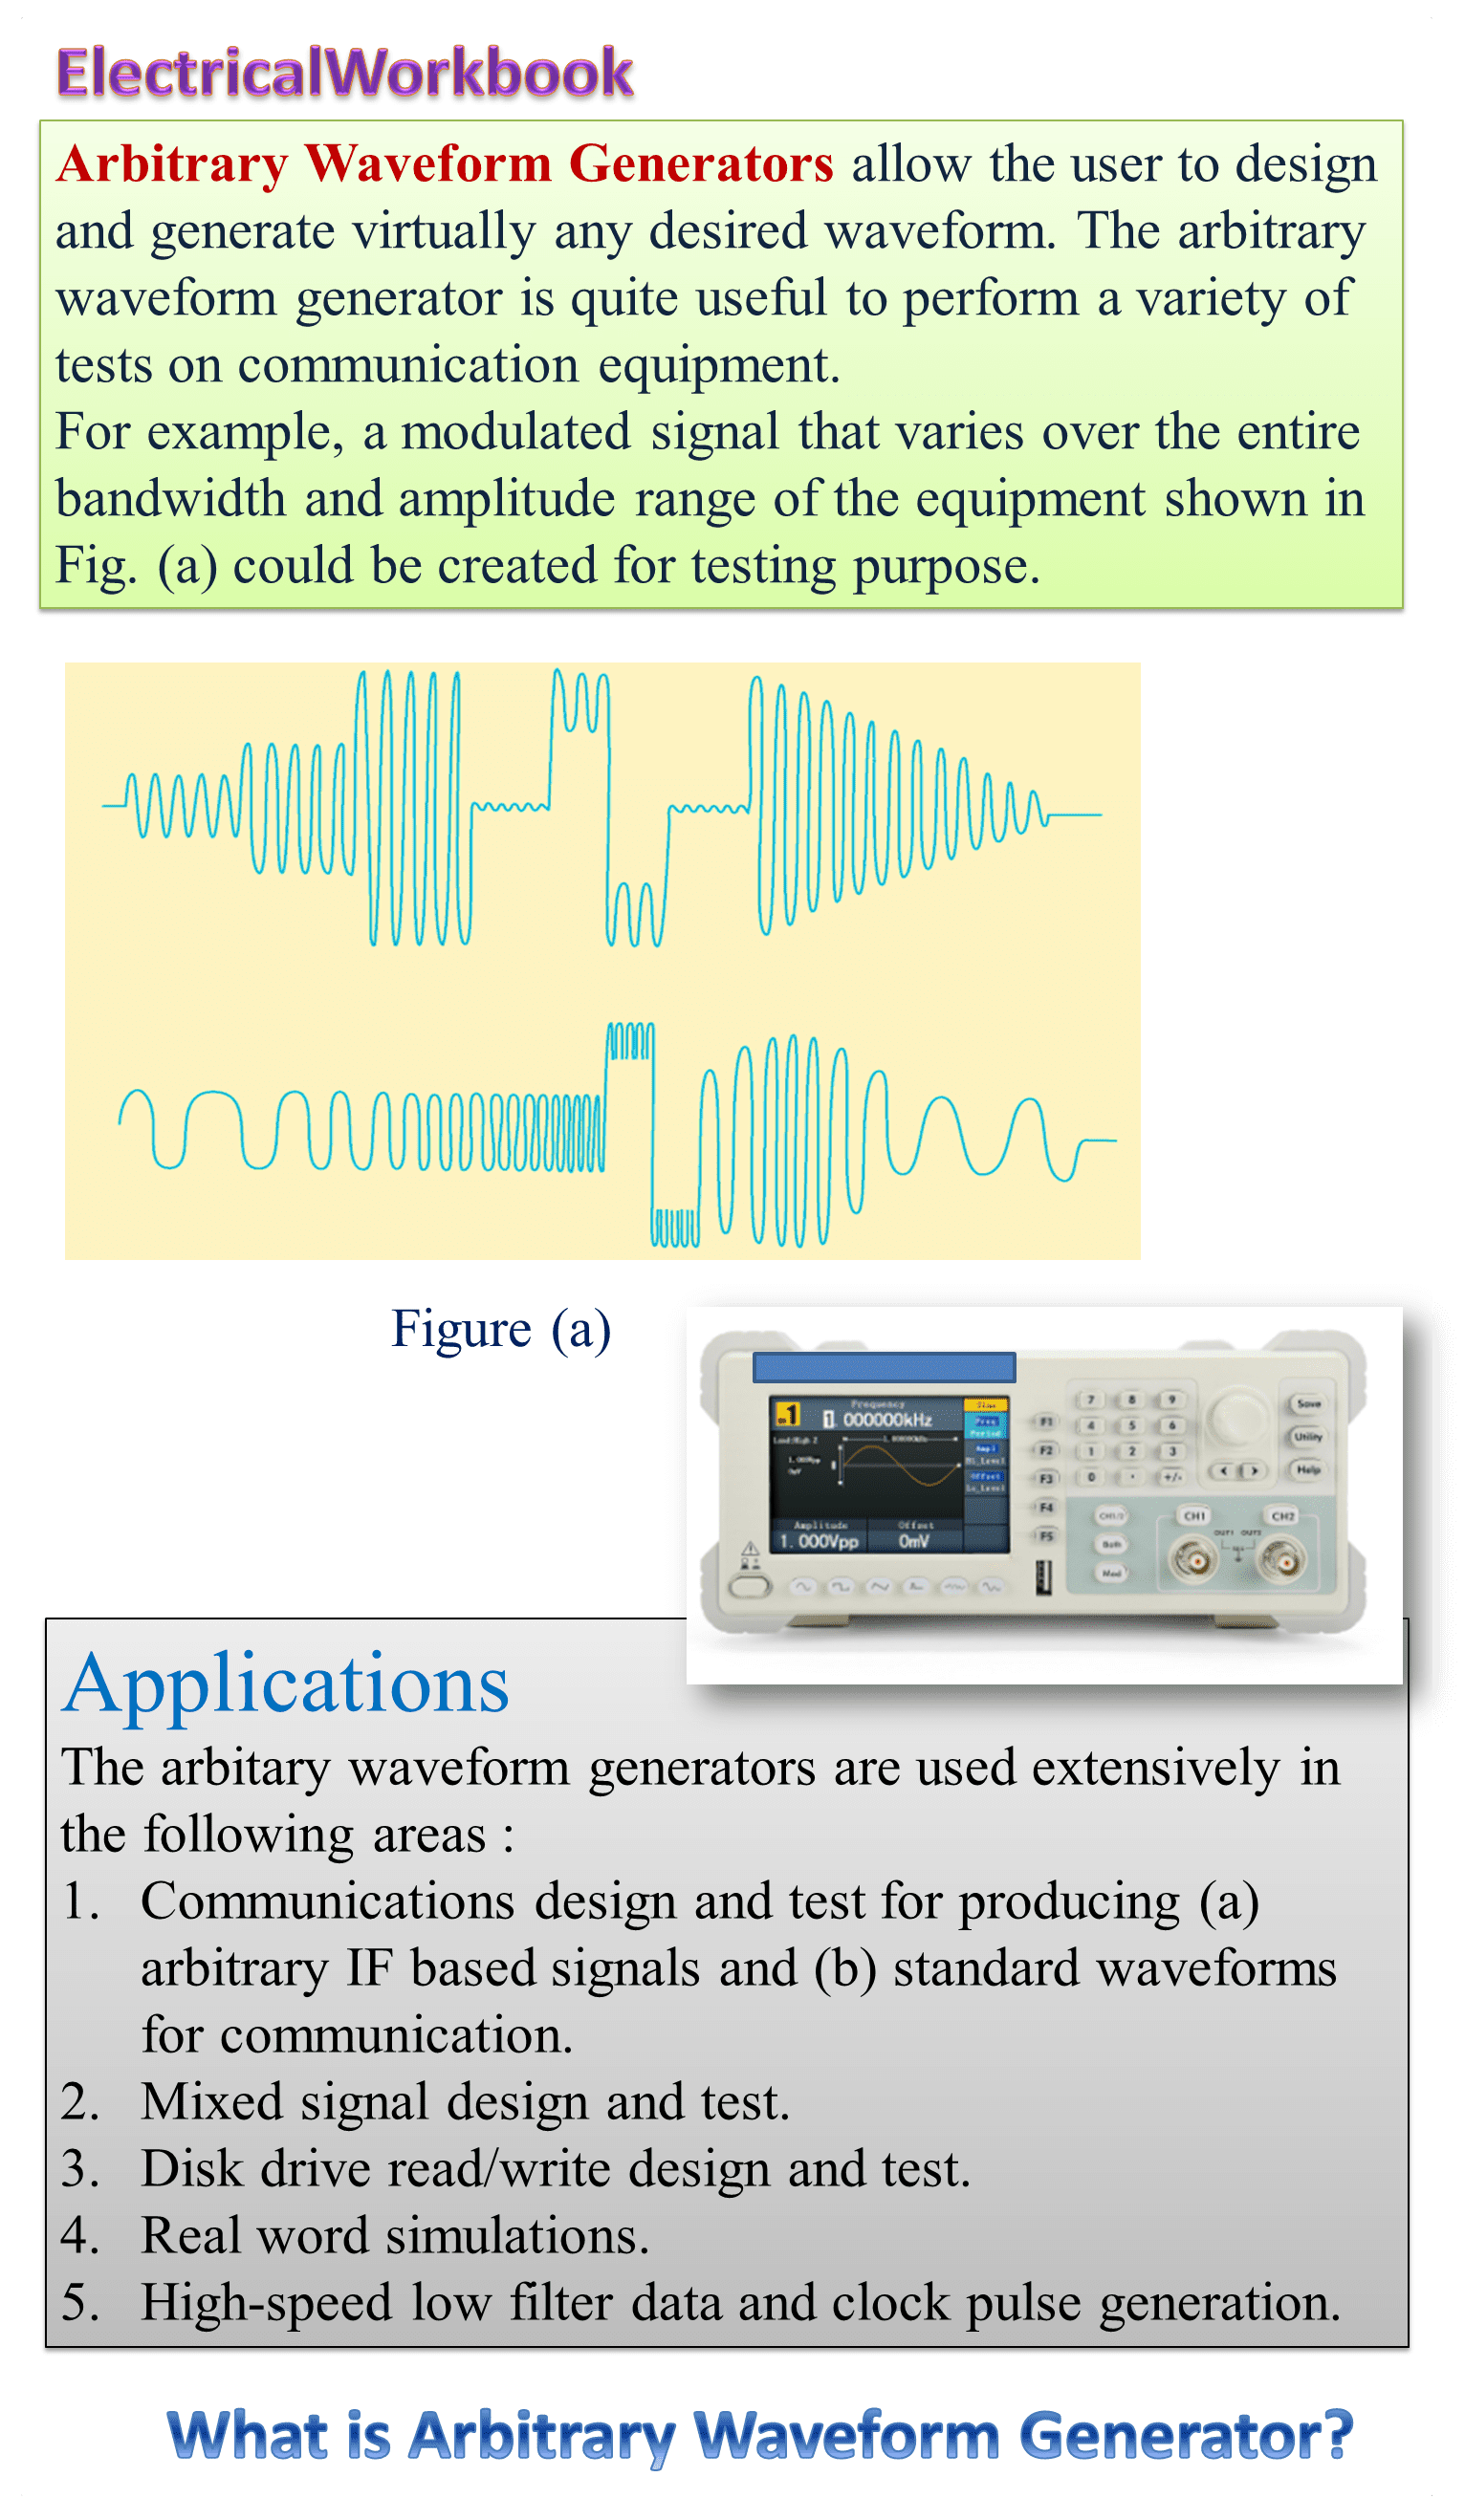 What is Arbitrary Waveform Generator (AWG)